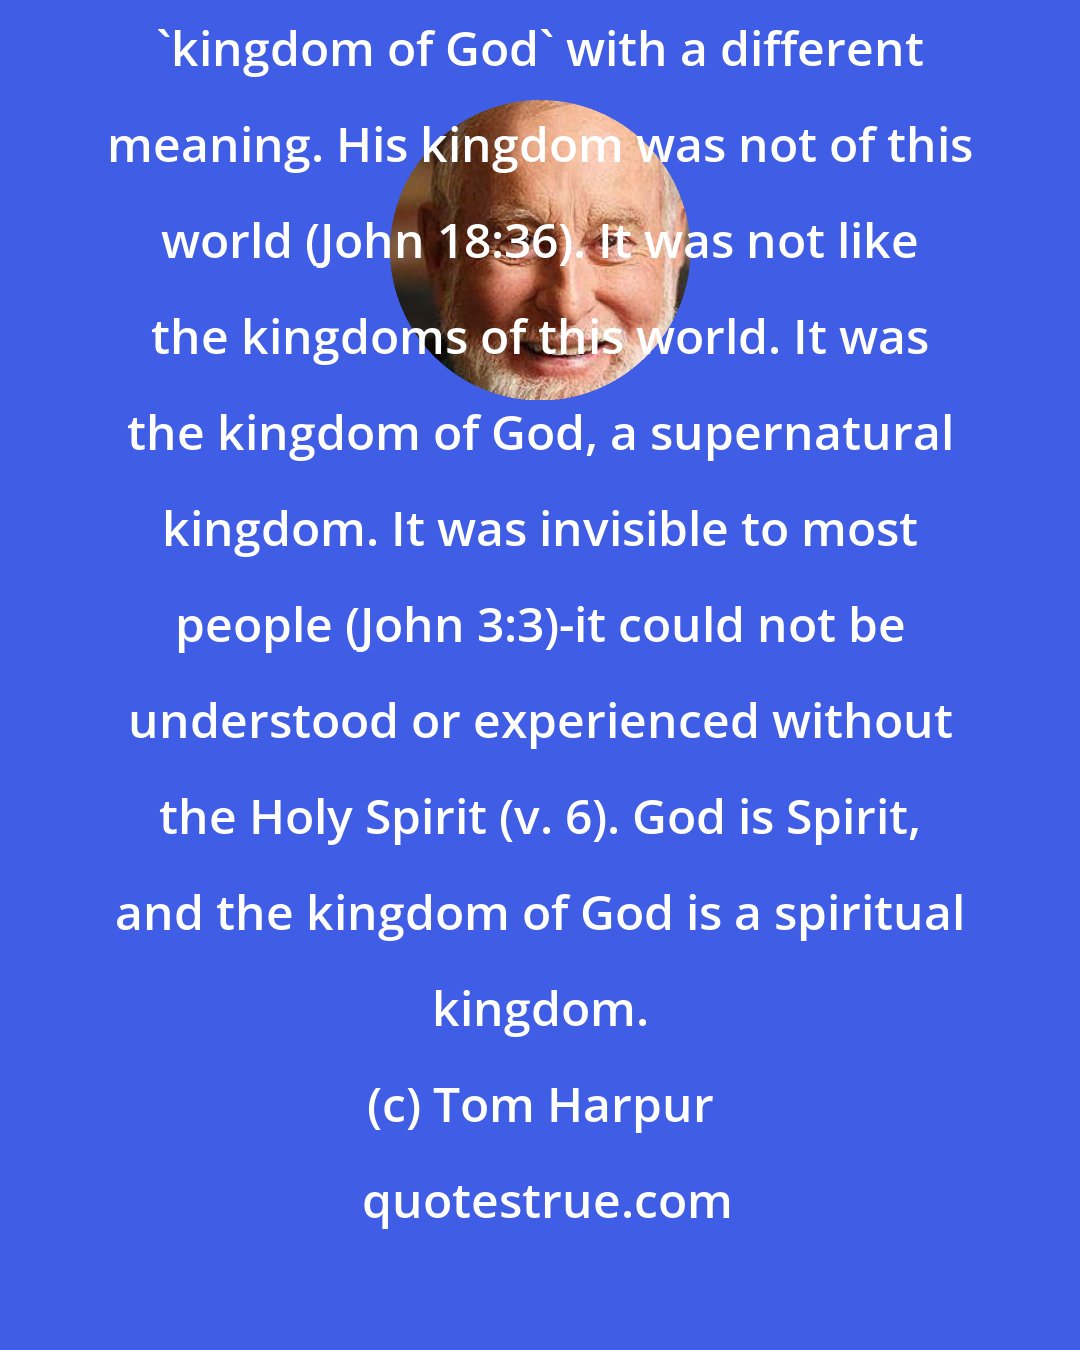 Tom Harpur: Jesus' kingdom was not like the popular expectation. He used the phrase 'kingdom of God' with a different meaning. His kingdom was not of this world (John 18:36). It was not like the kingdoms of this world. It was the kingdom of God, a supernatural kingdom. It was invisible to most people (John 3:3)-it could not be understood or experienced without the Holy Spirit (v. 6). God is Spirit, and the kingdom of God is a spiritual kingdom.